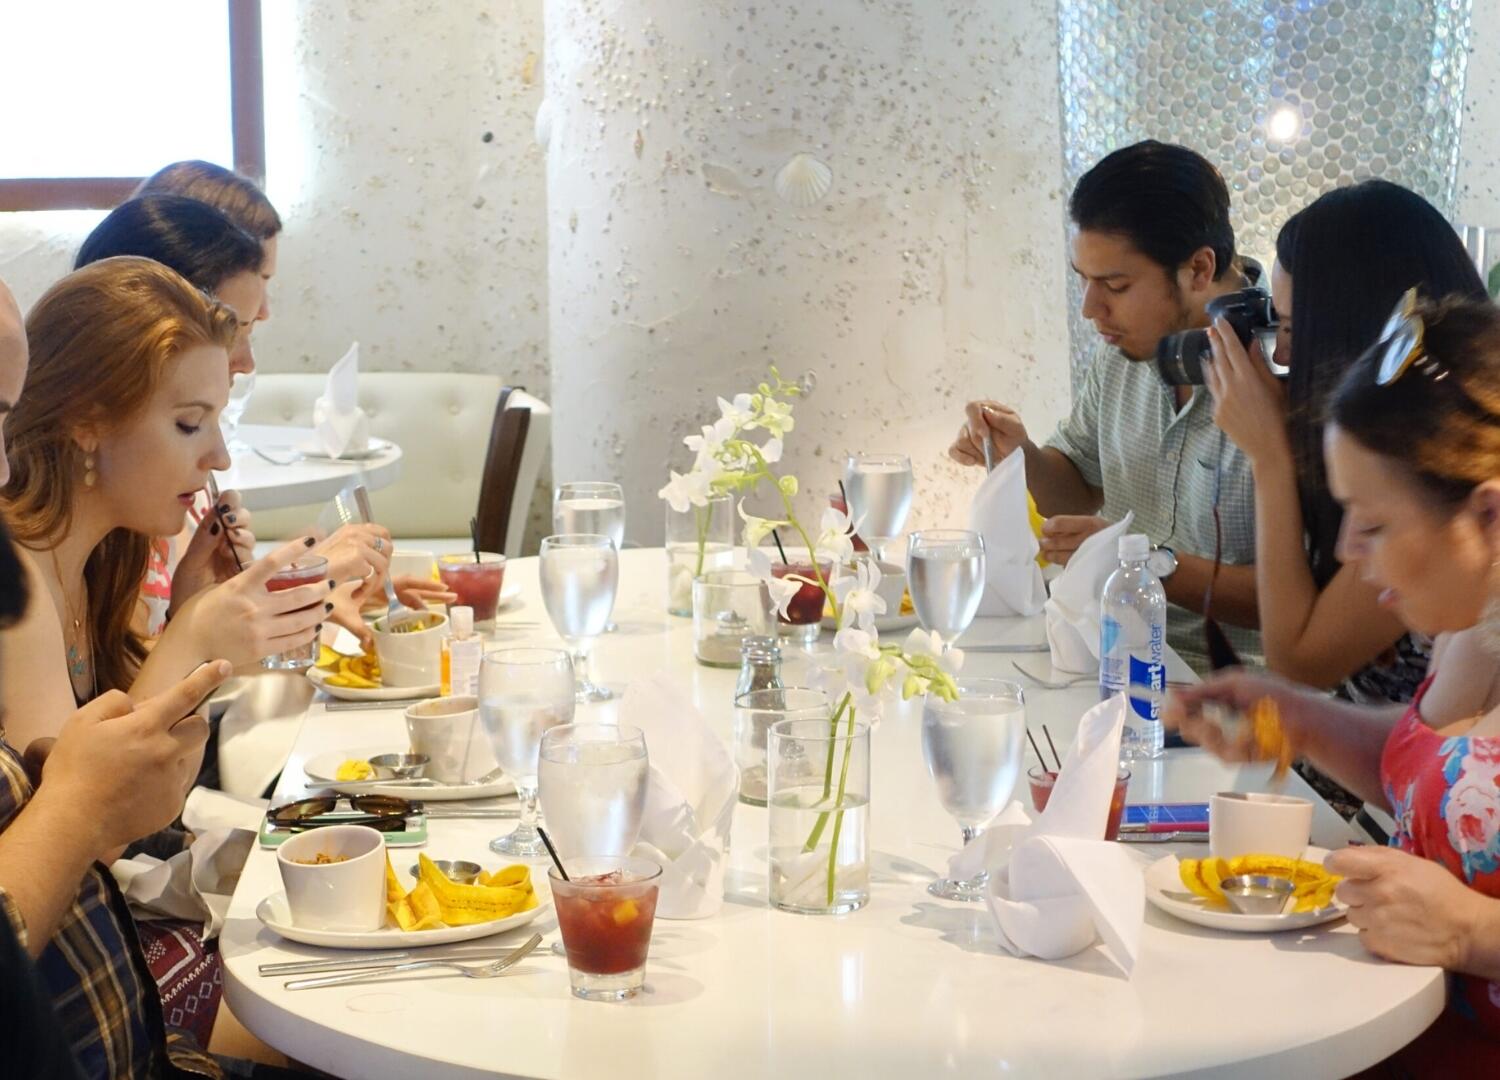 A group of people on a Miami Food Tour, enjoying a culinary experience at a table in a restaurant.